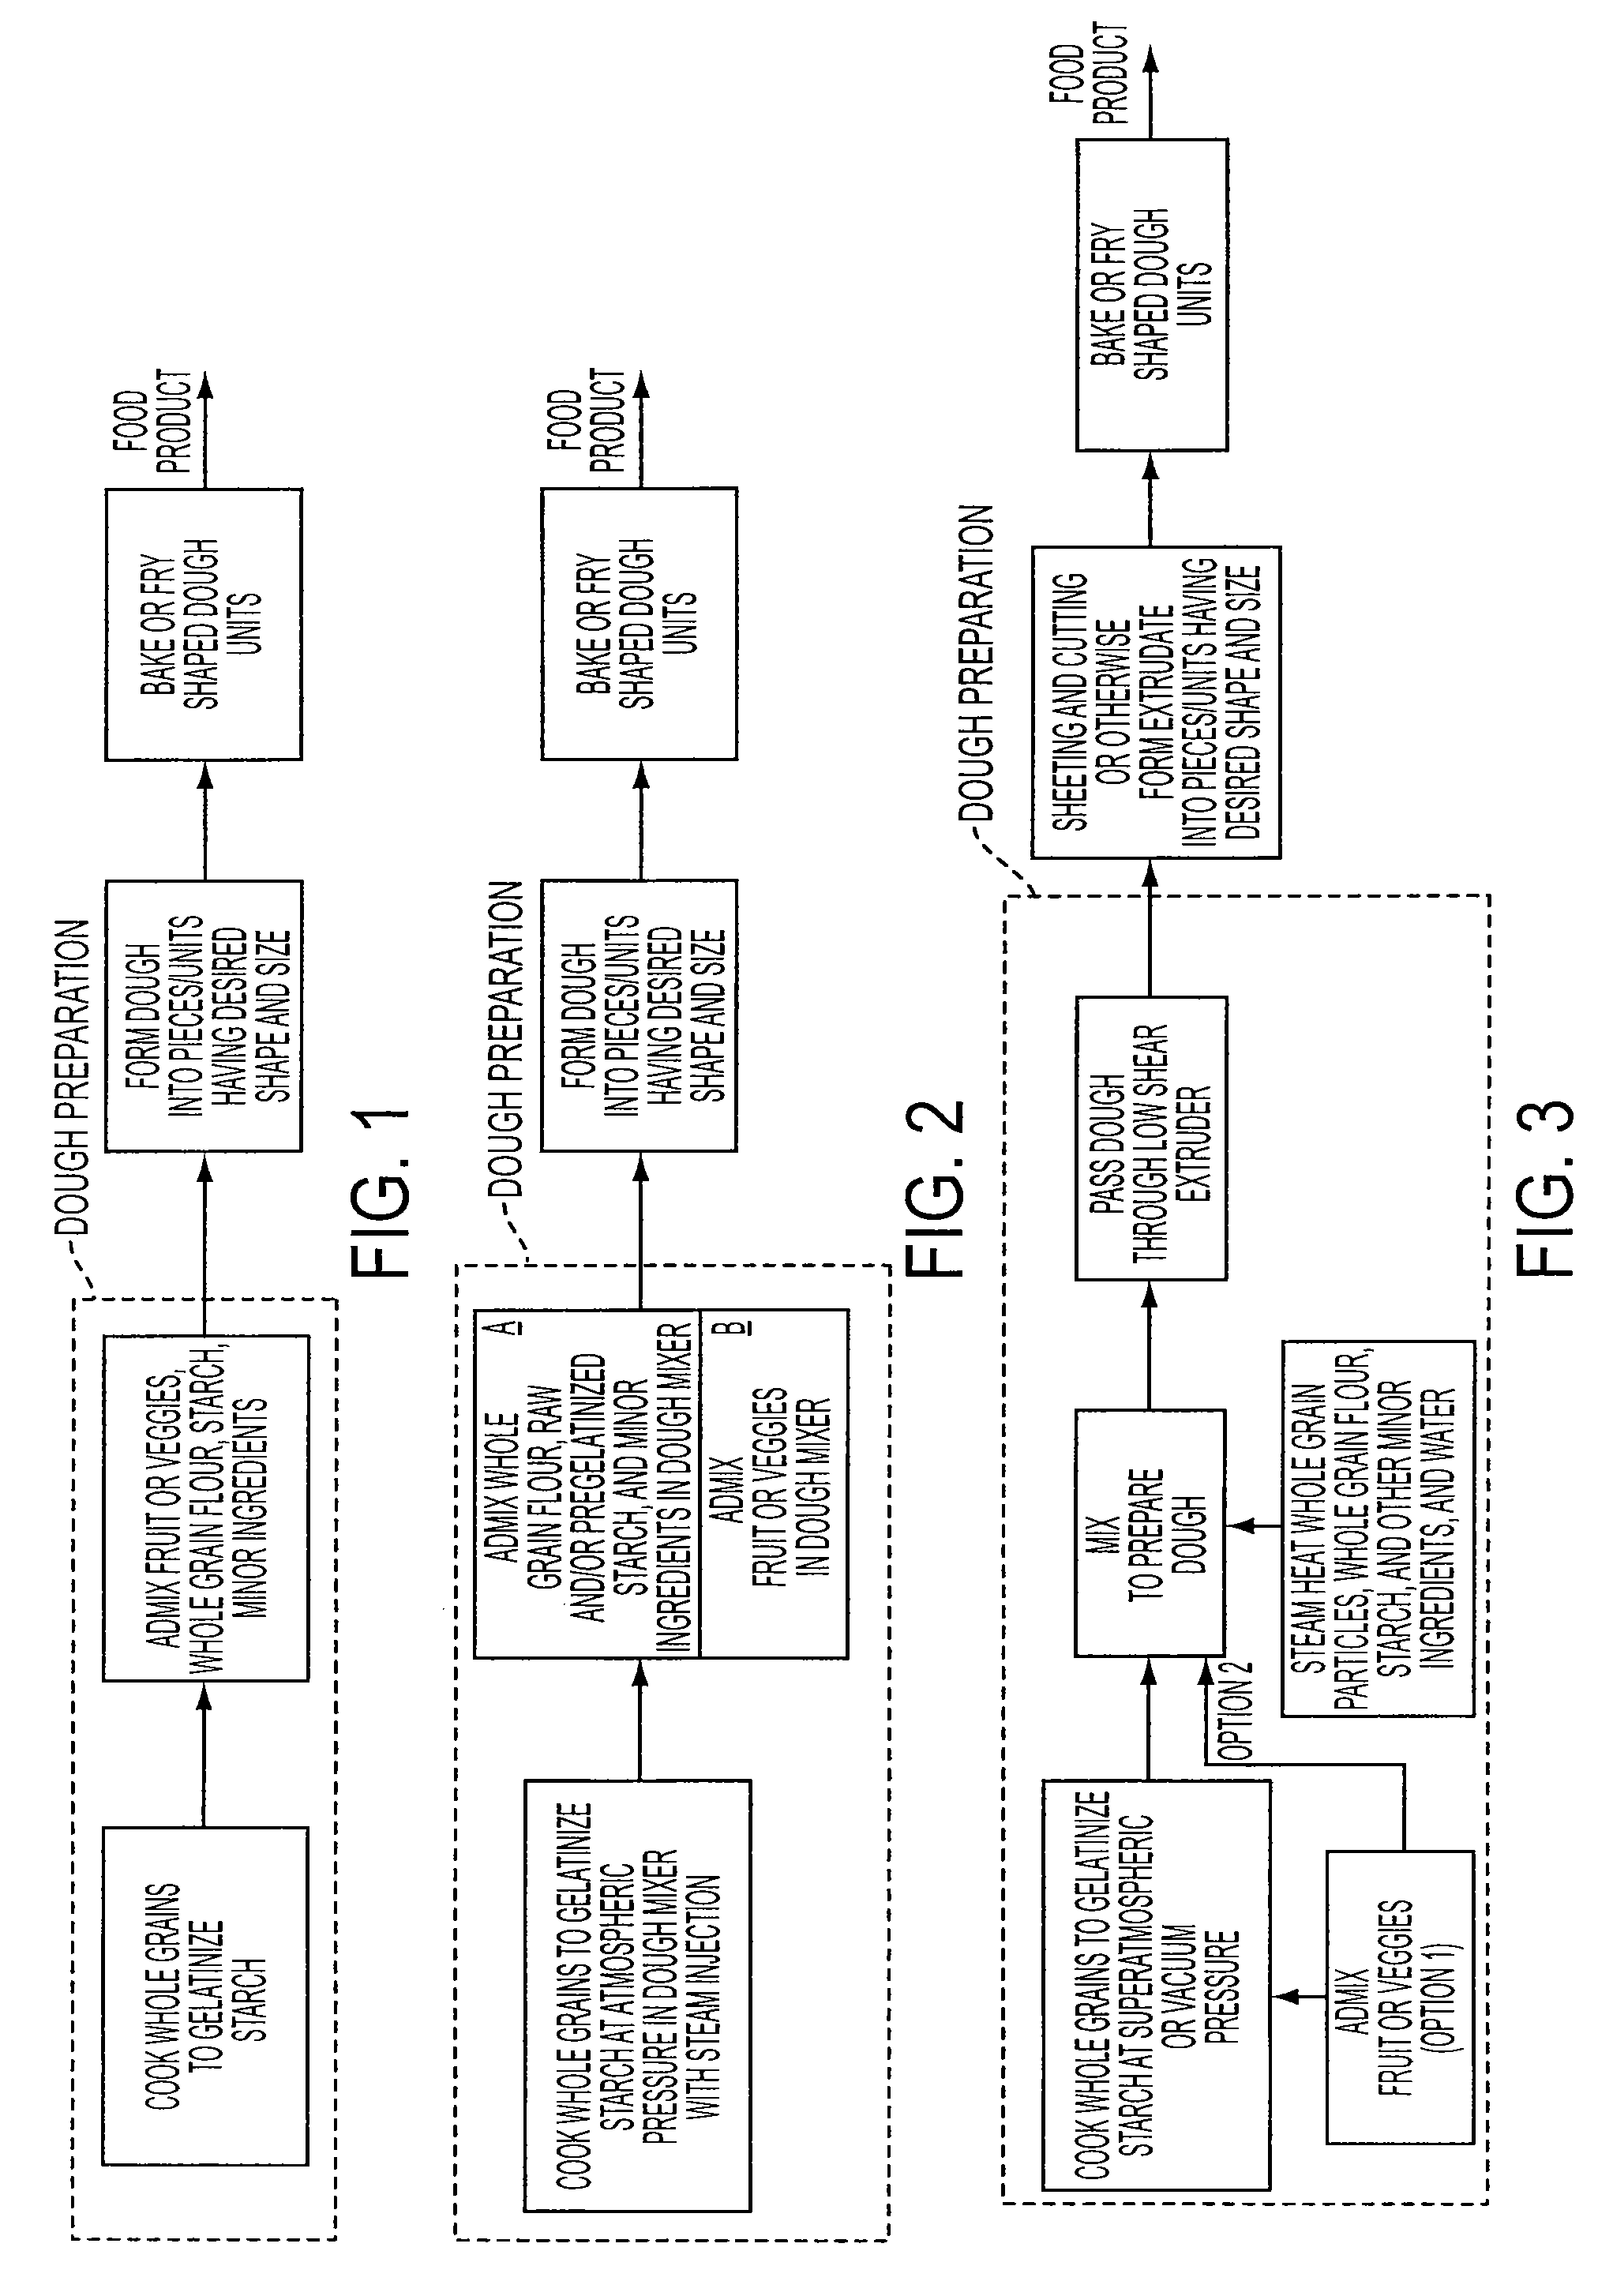 Production of whole grain-containing composite food products